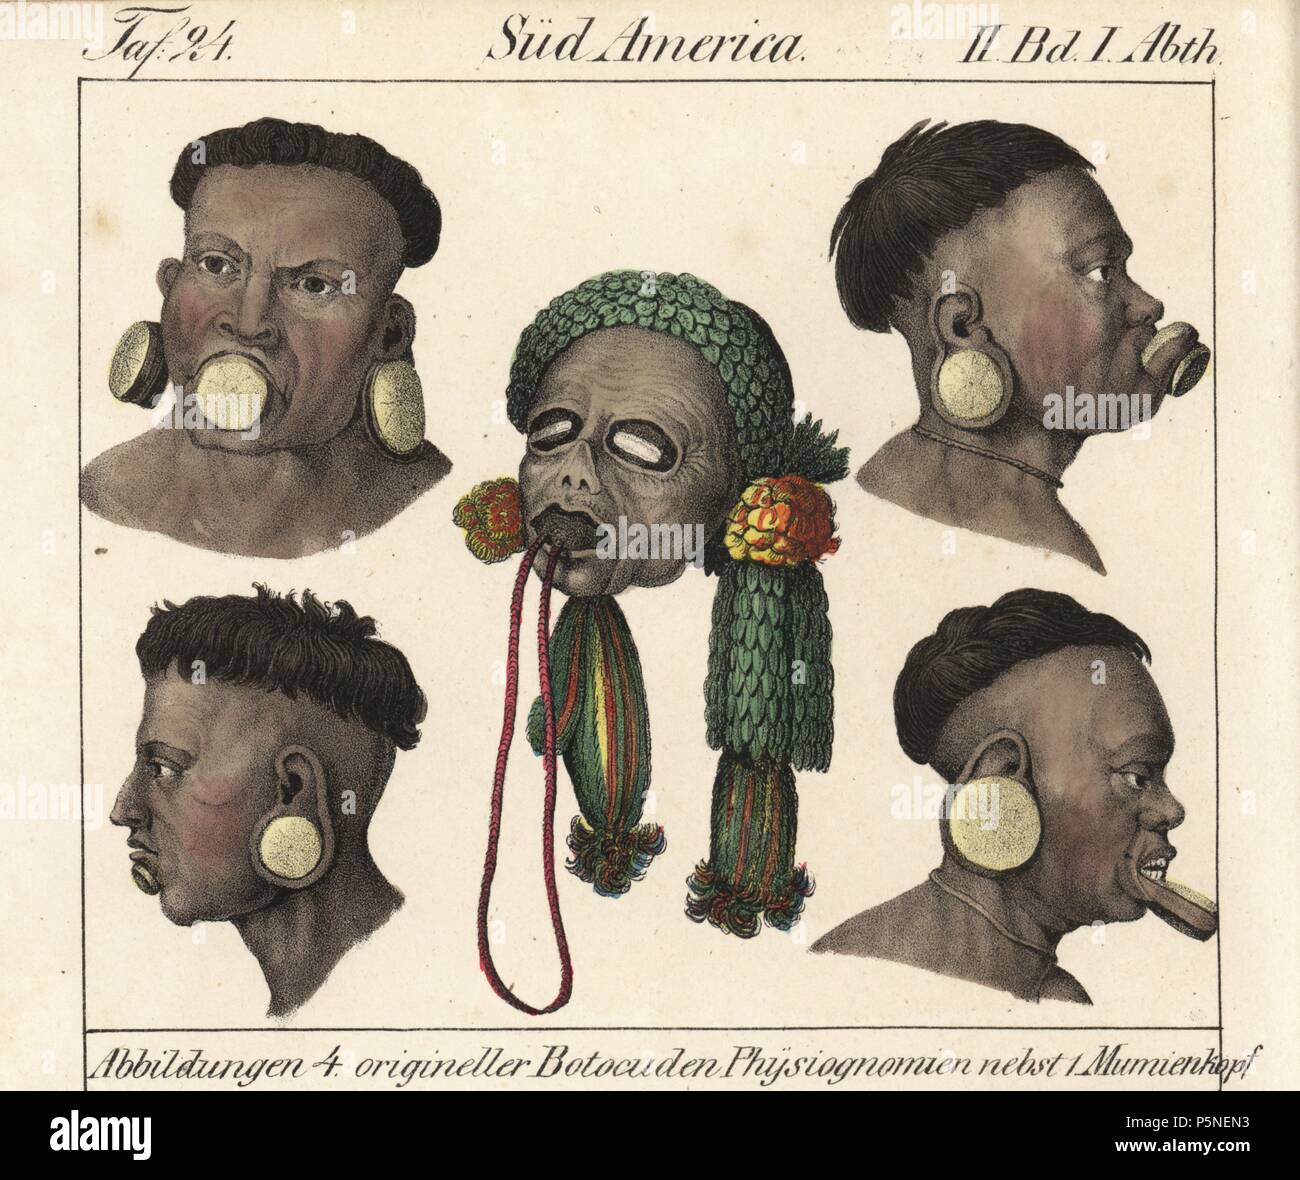 Four heads of Botocudo men from Eastern Brazil, South America, with their distinctive wooden disks in lips and ears. Mummified head of a Botocudo man. Handcoloured lithograph from Friedrich Wilhelm Goedsche's "Vollstaendige Völkergallerie in getreuen Abbildungen" (Complete Gallery of Peoples in True Pictures), Meissen, circa 1835-1840. Goedsche (1785-1863) was a German writer, bookseller and publisher in Meissen. Many of the illustrations were adapted from Bertuch's "Bilderbuch fur Kinder" and others. Stock Photo